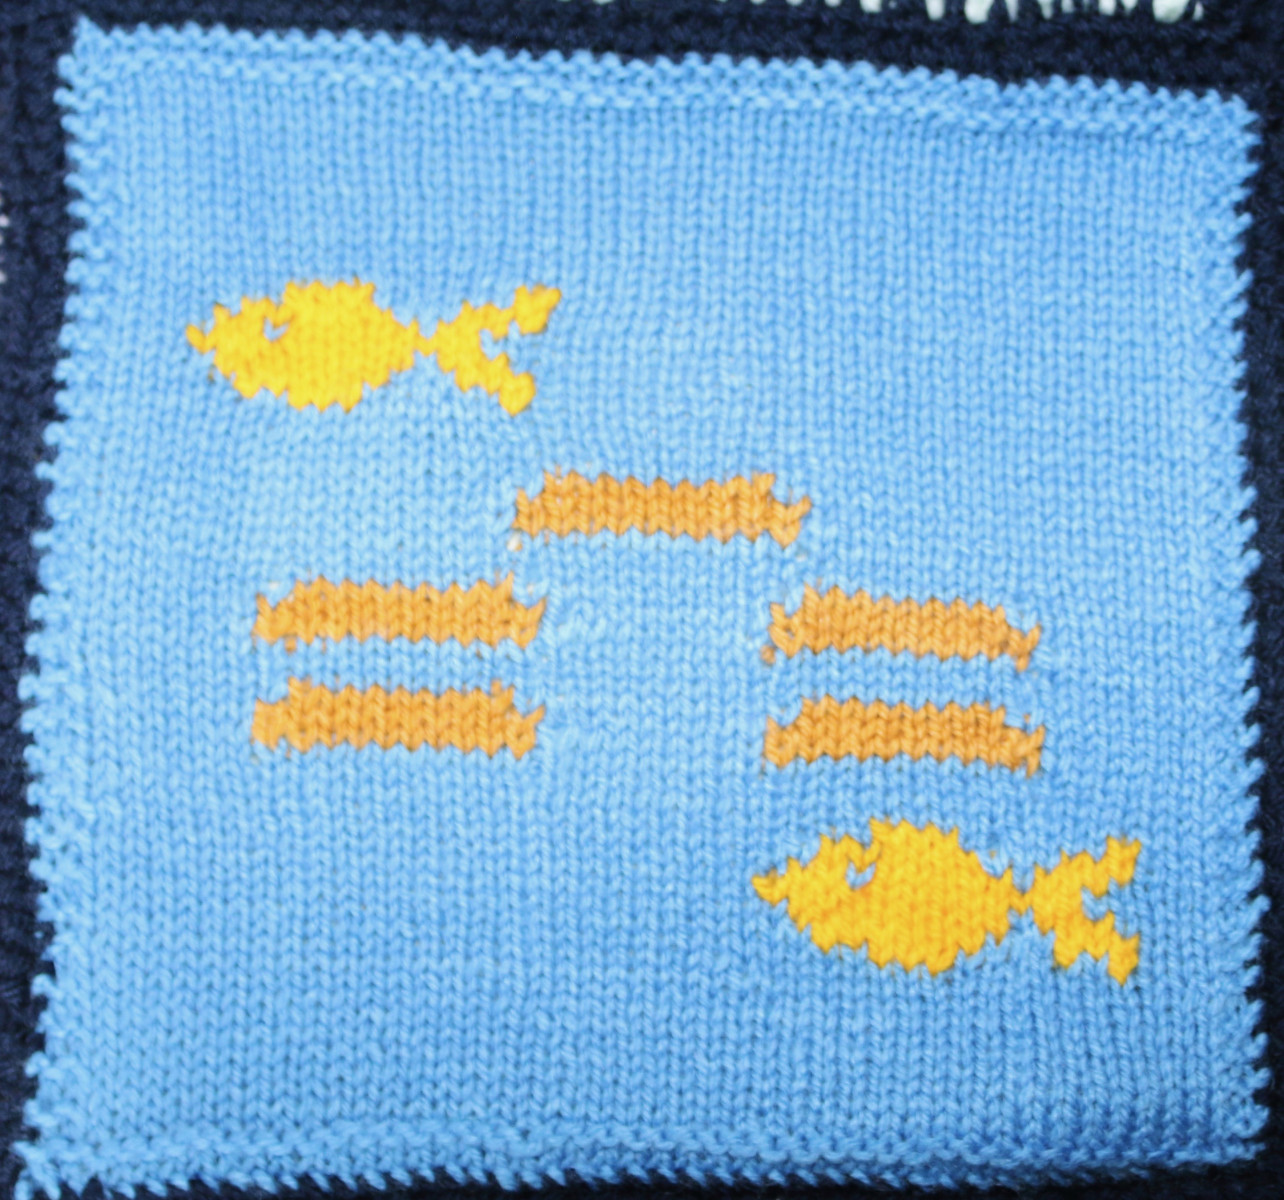 Knitted square: 5 loaves and 2 fishes